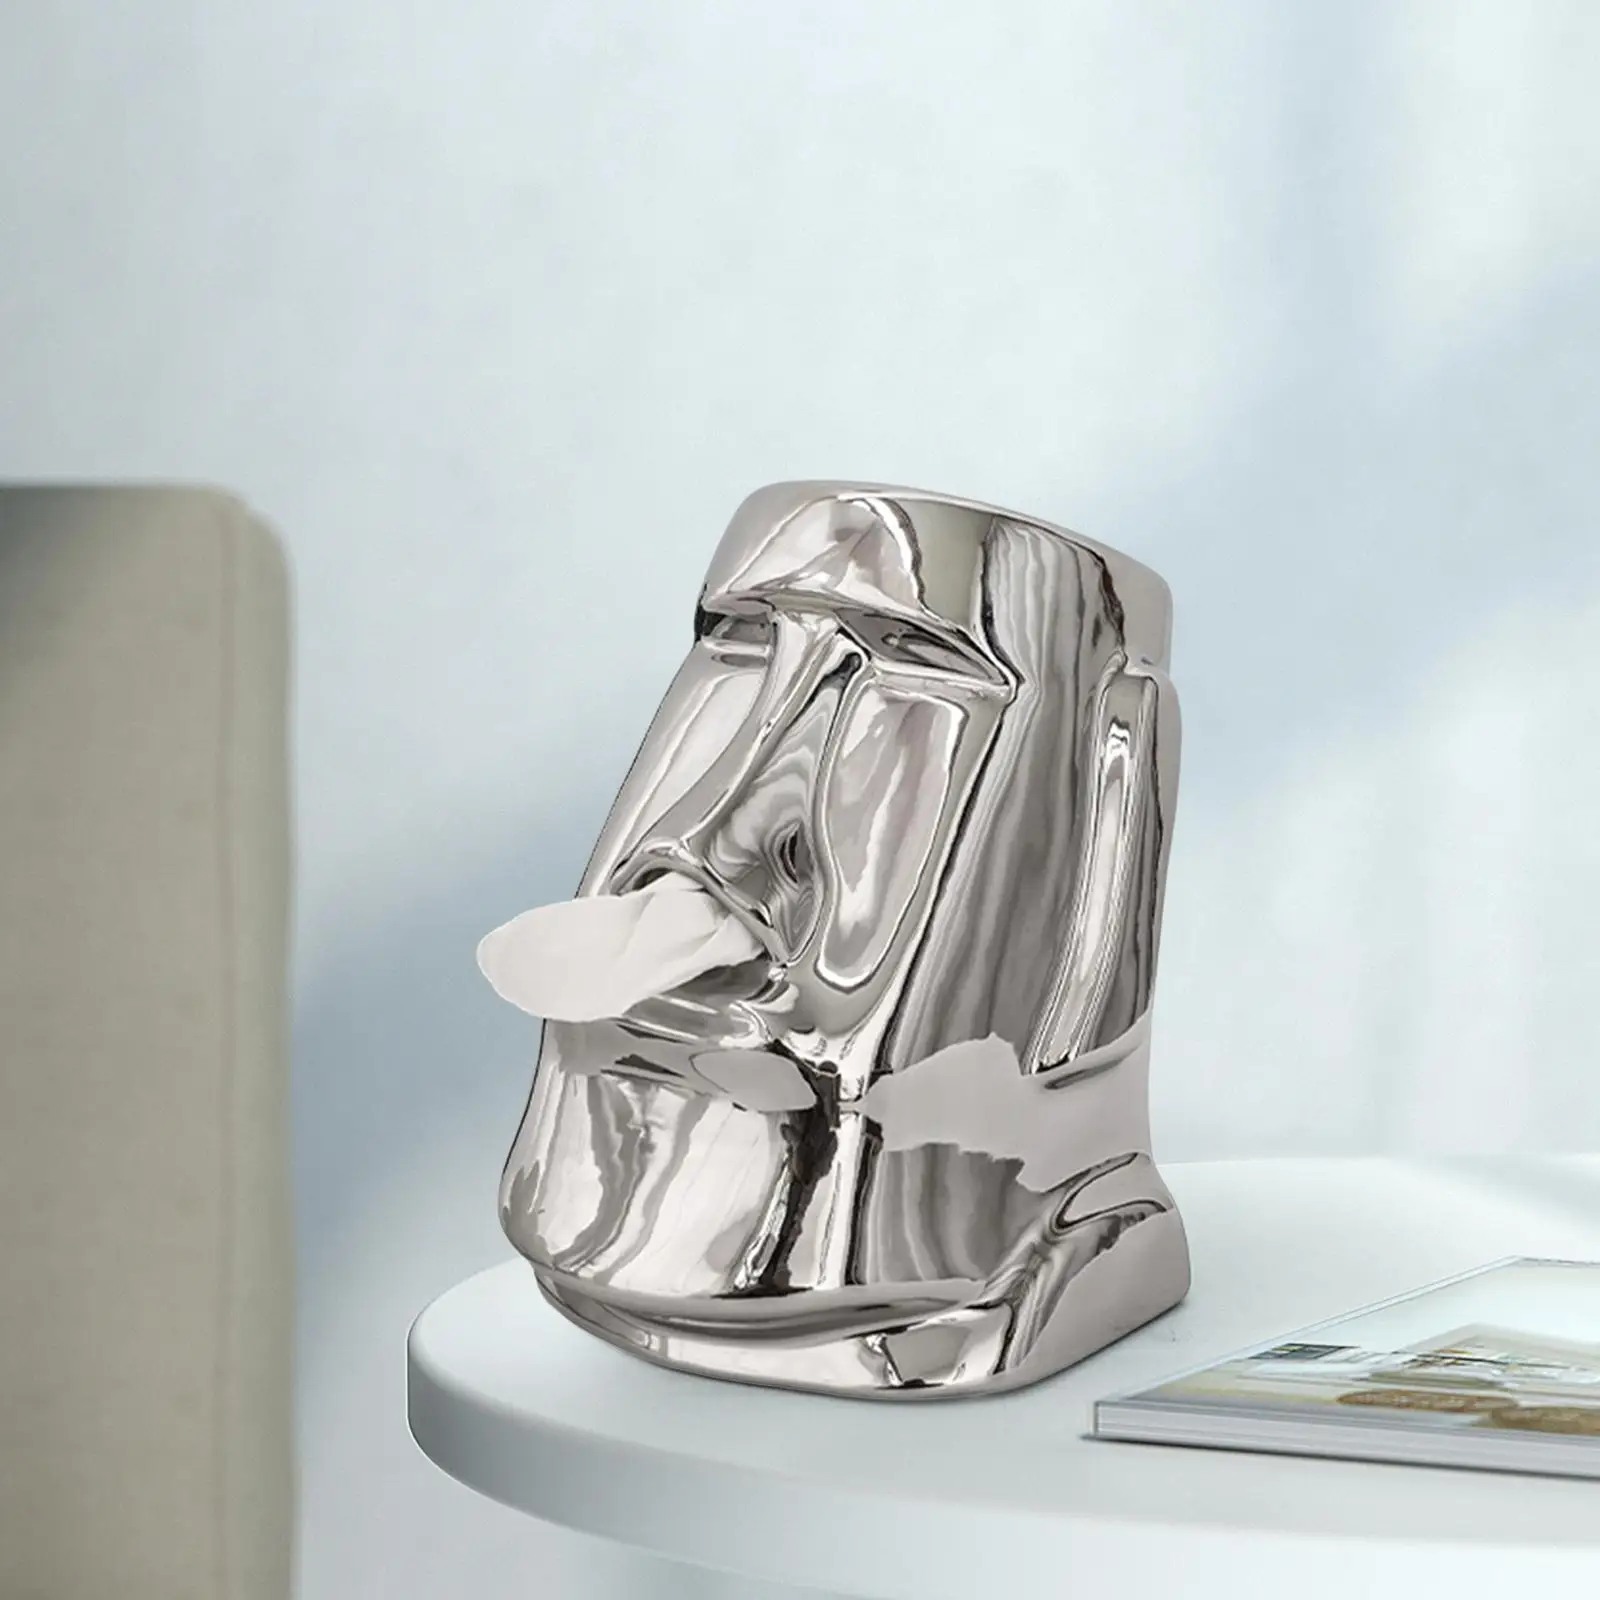 Facial Tissues Container Sculpture Statue Tissue Box for NightStand Dormitory